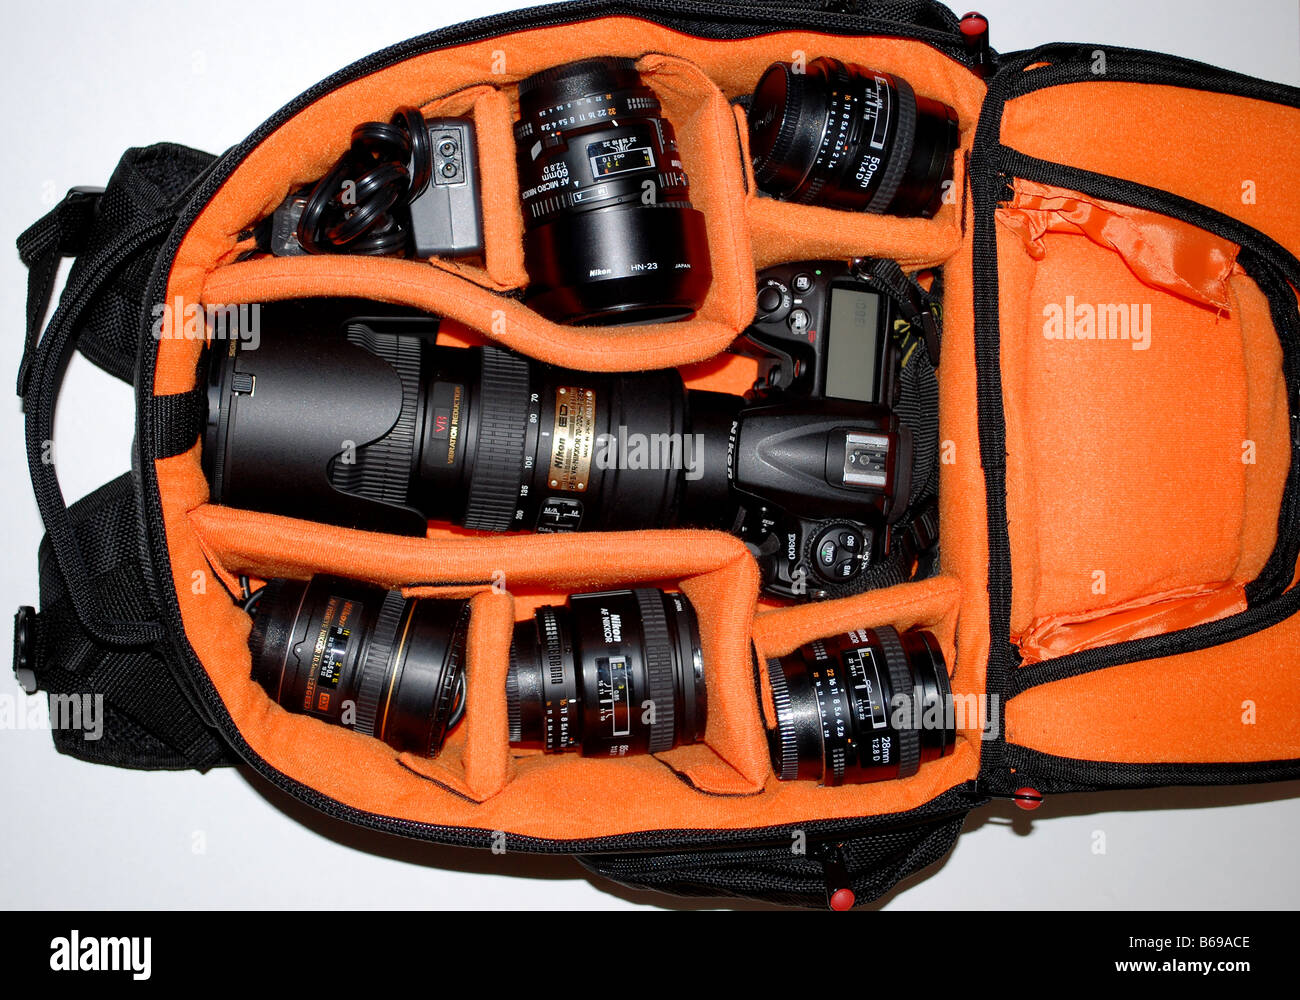 A camera bag, perfectly organized, filled with Nikon photography equipment, telephoto lenses, flash, cables, camera body. Stock Photo